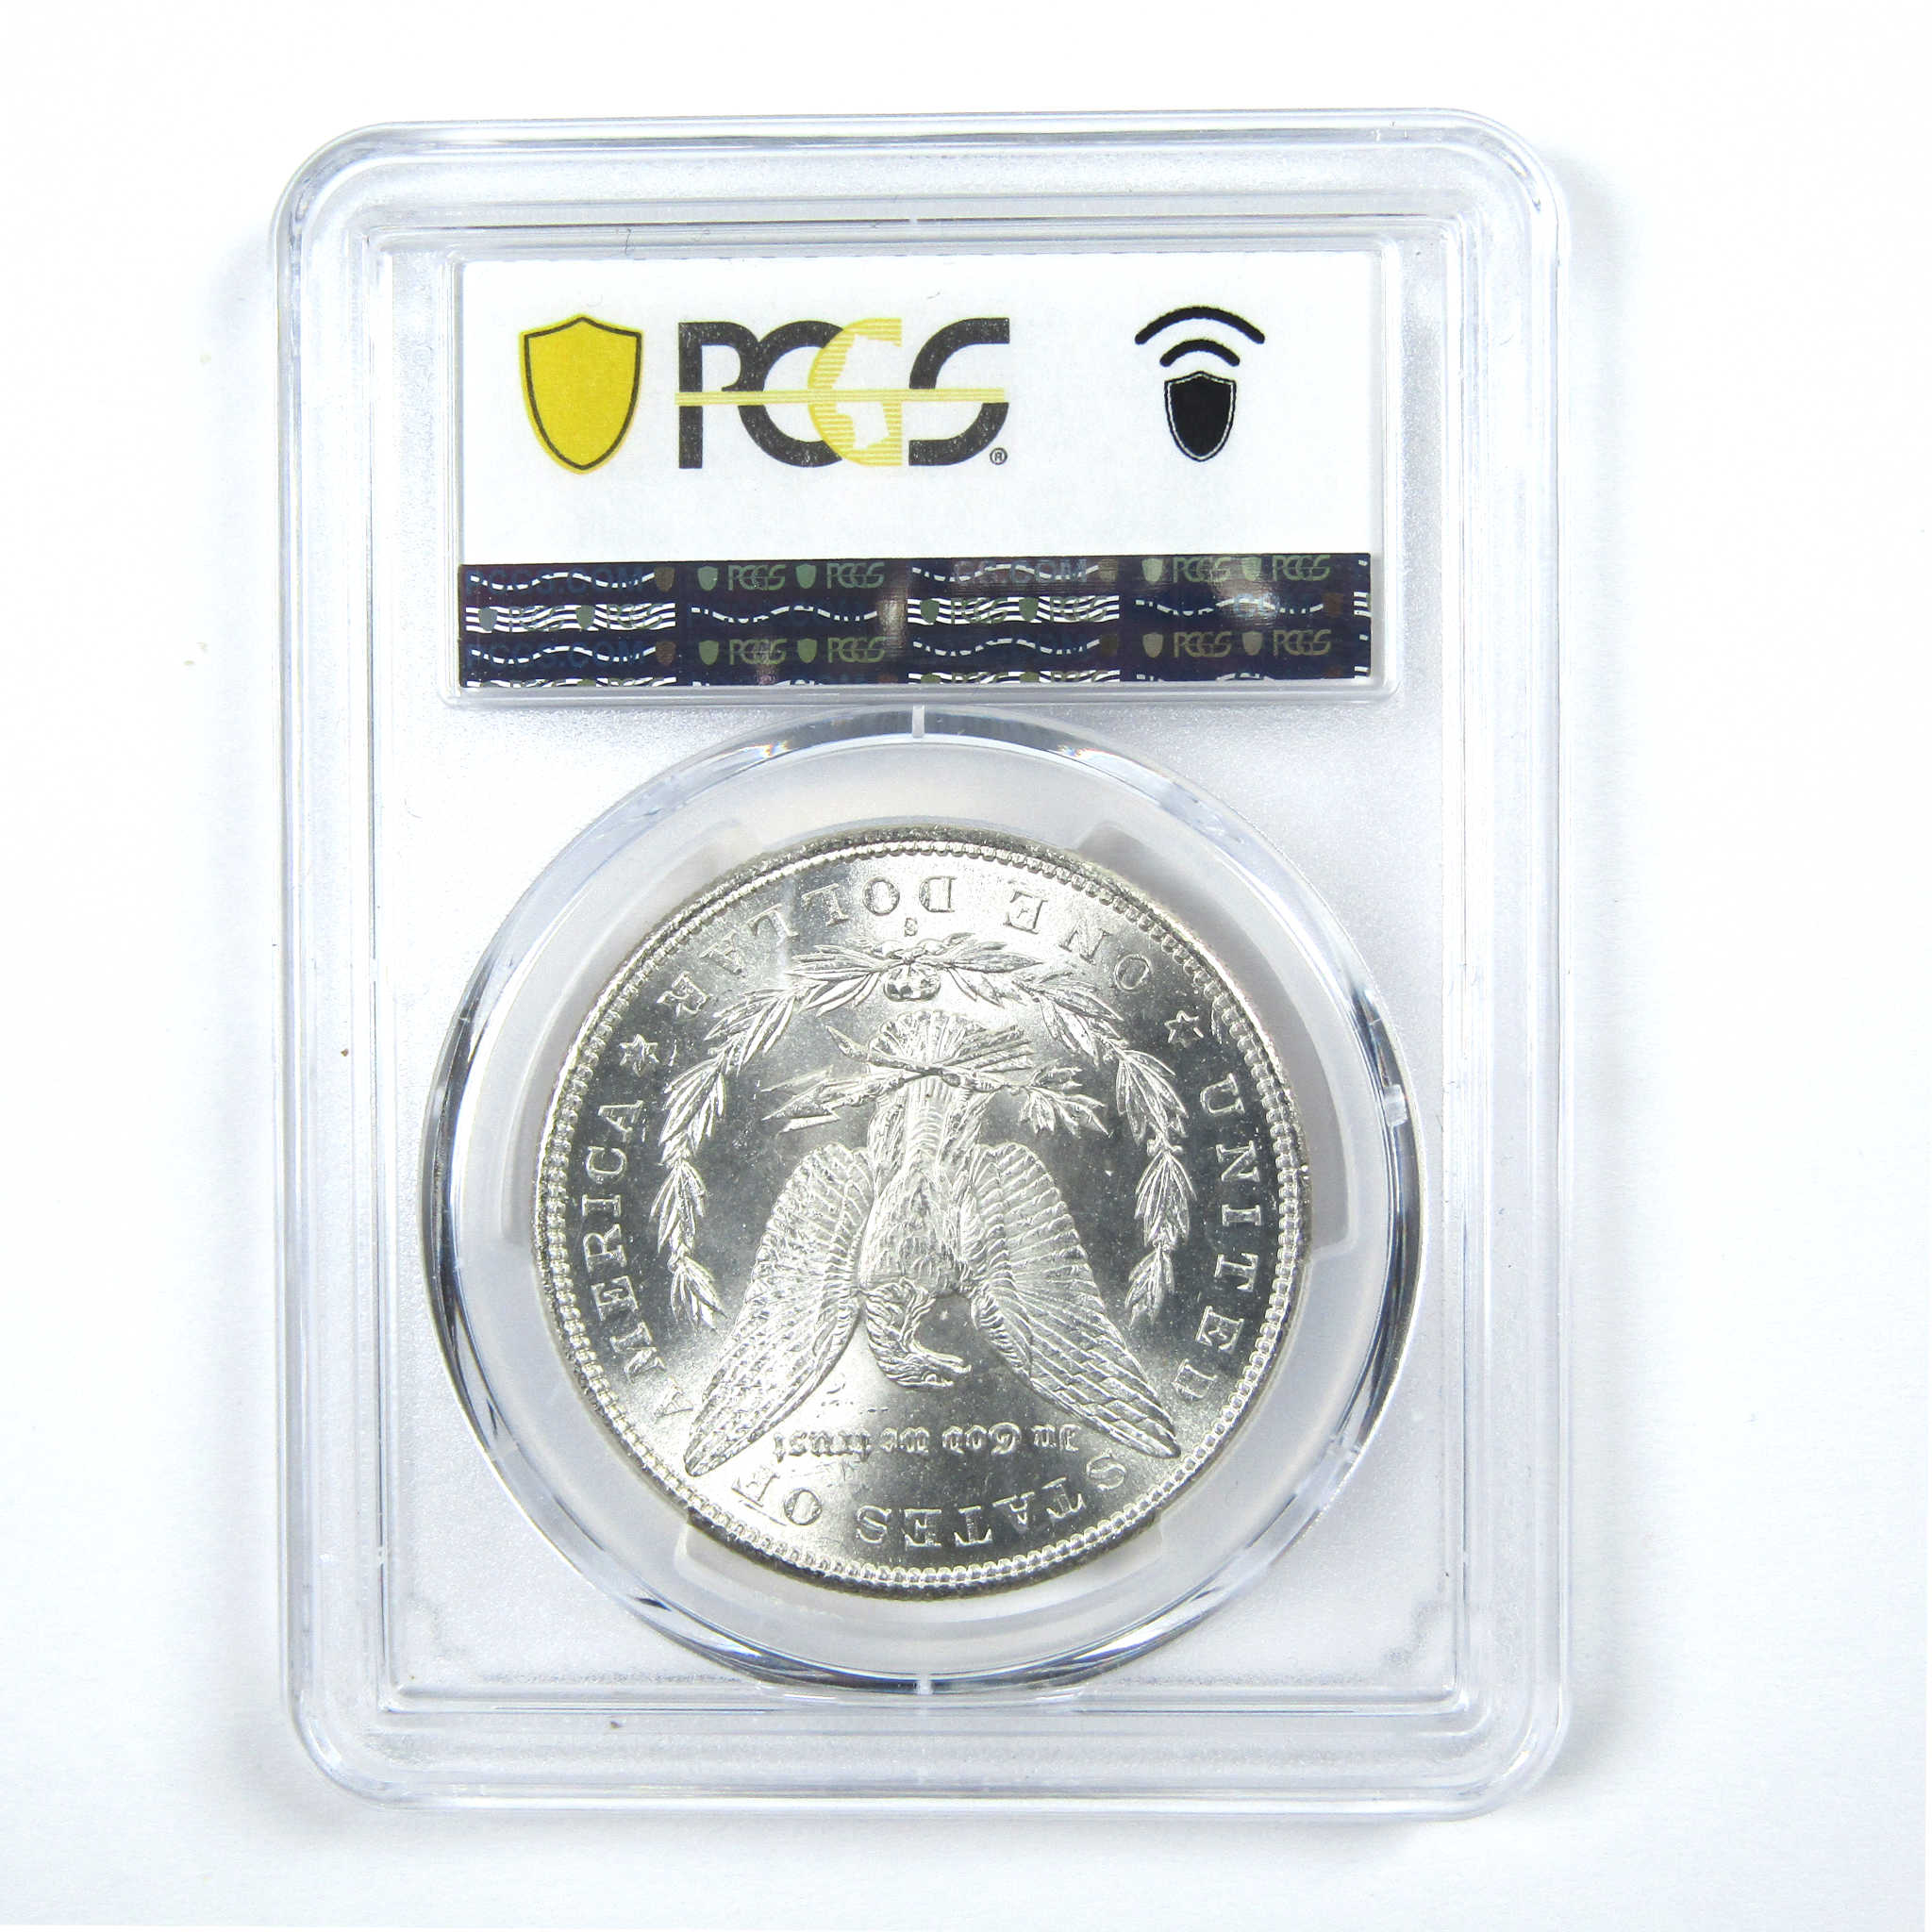 1897 S Morgan Dollar MS 64 PCGS Silver $1 Uncirculated Coin SKU:I13921 - Morgan coin - Morgan silver dollar - Morgan silver dollar for sale - Profile Coins &amp; Collectibles